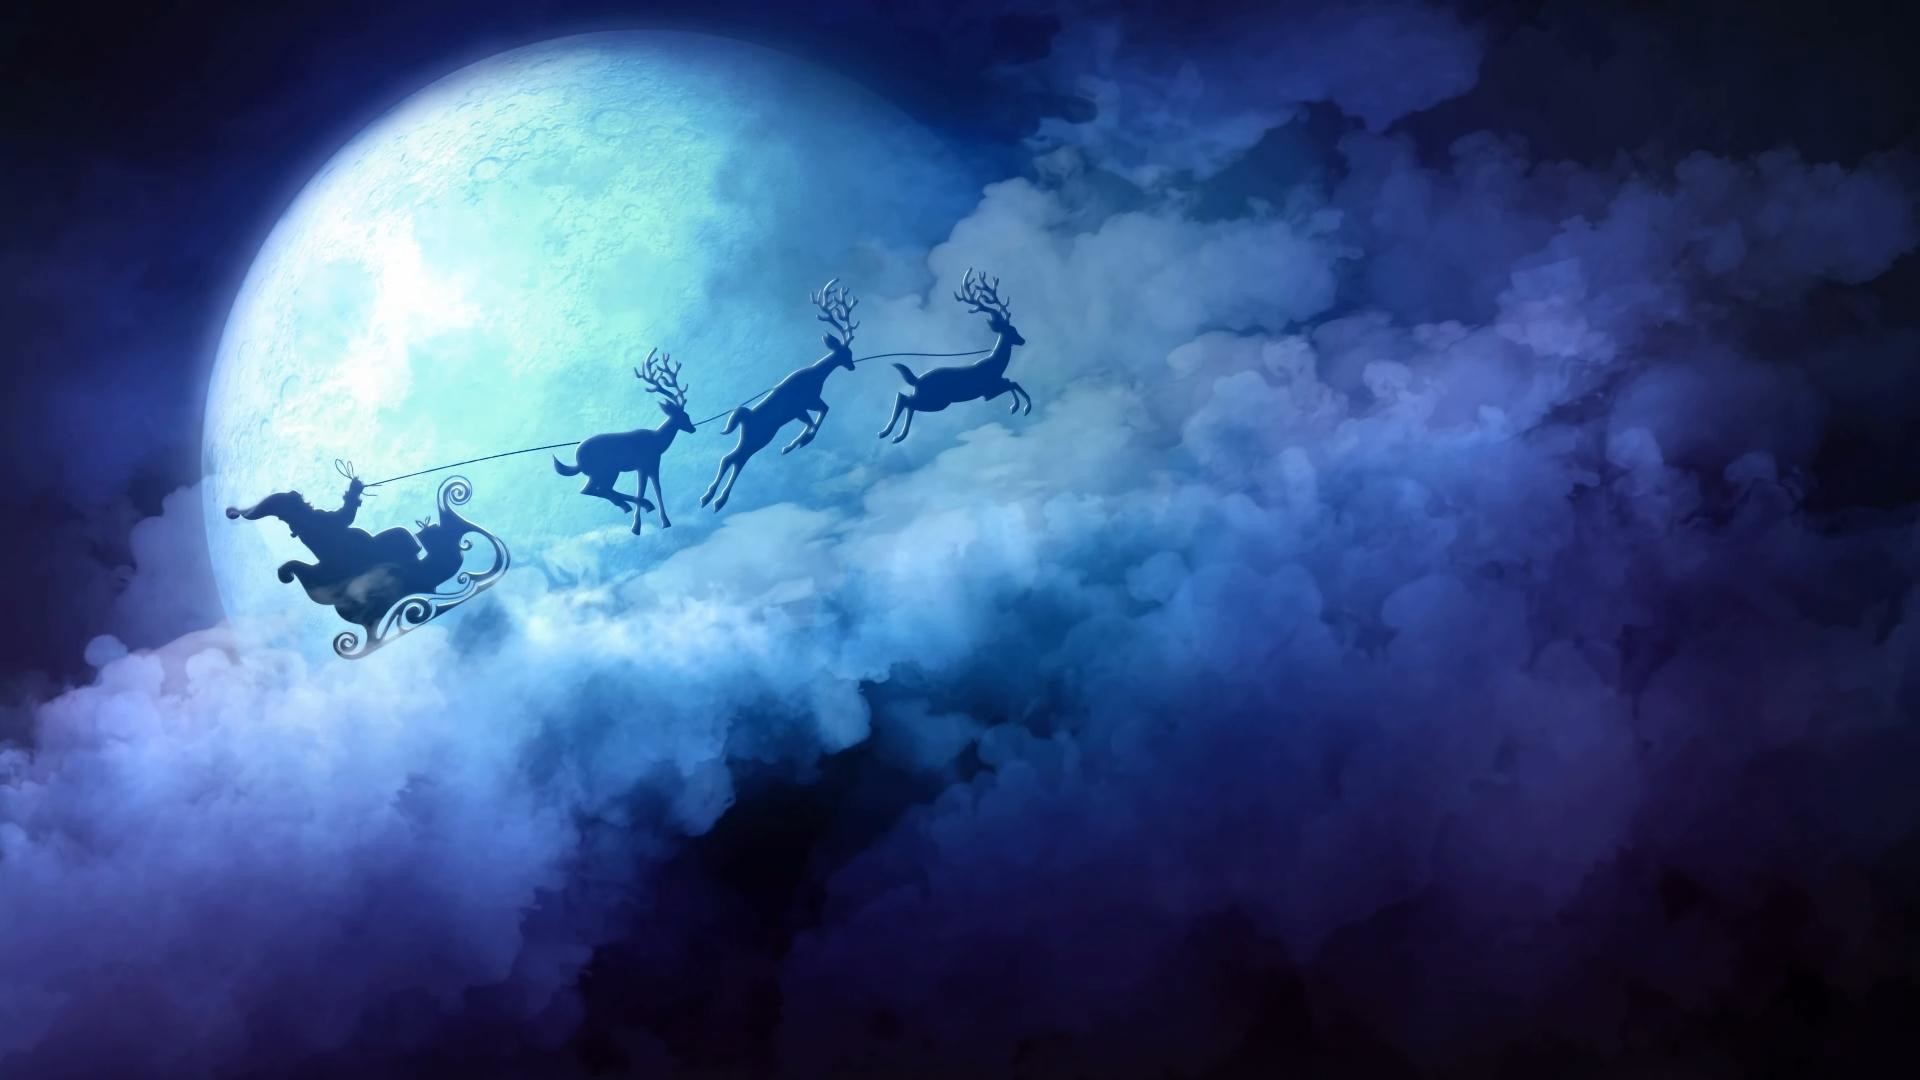 1920x1080 5 Best Holiday Animated Wallpapers for your Desktop